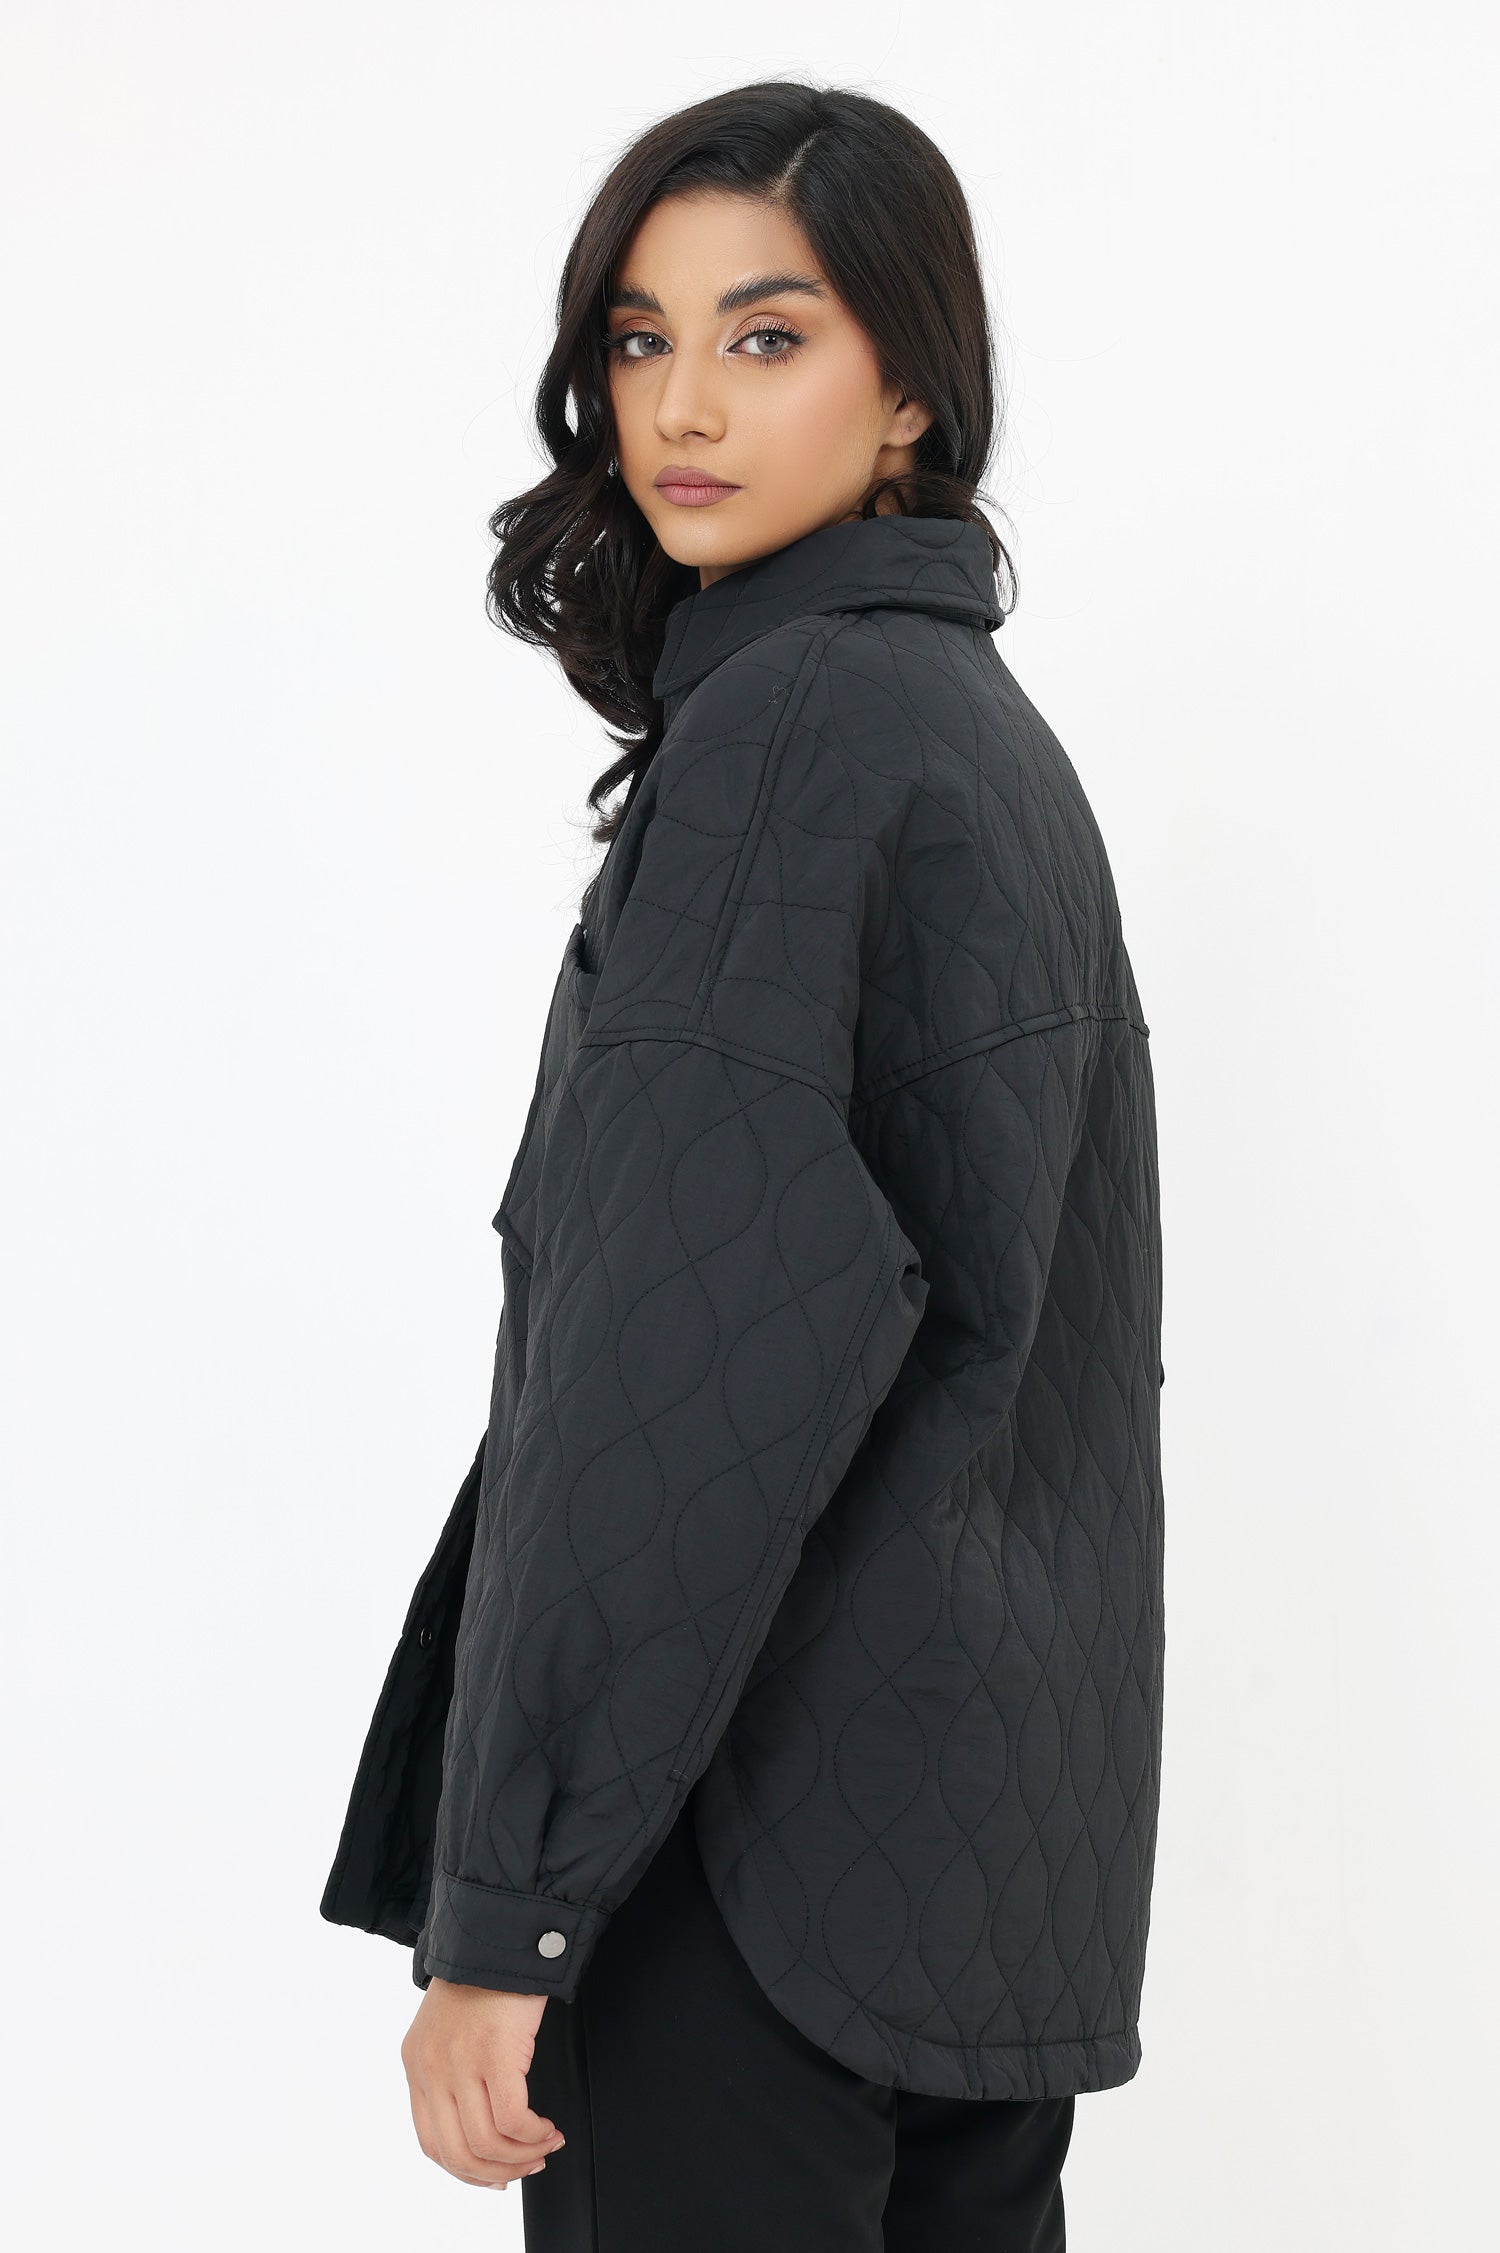 QUILTED JACKET-BLACK